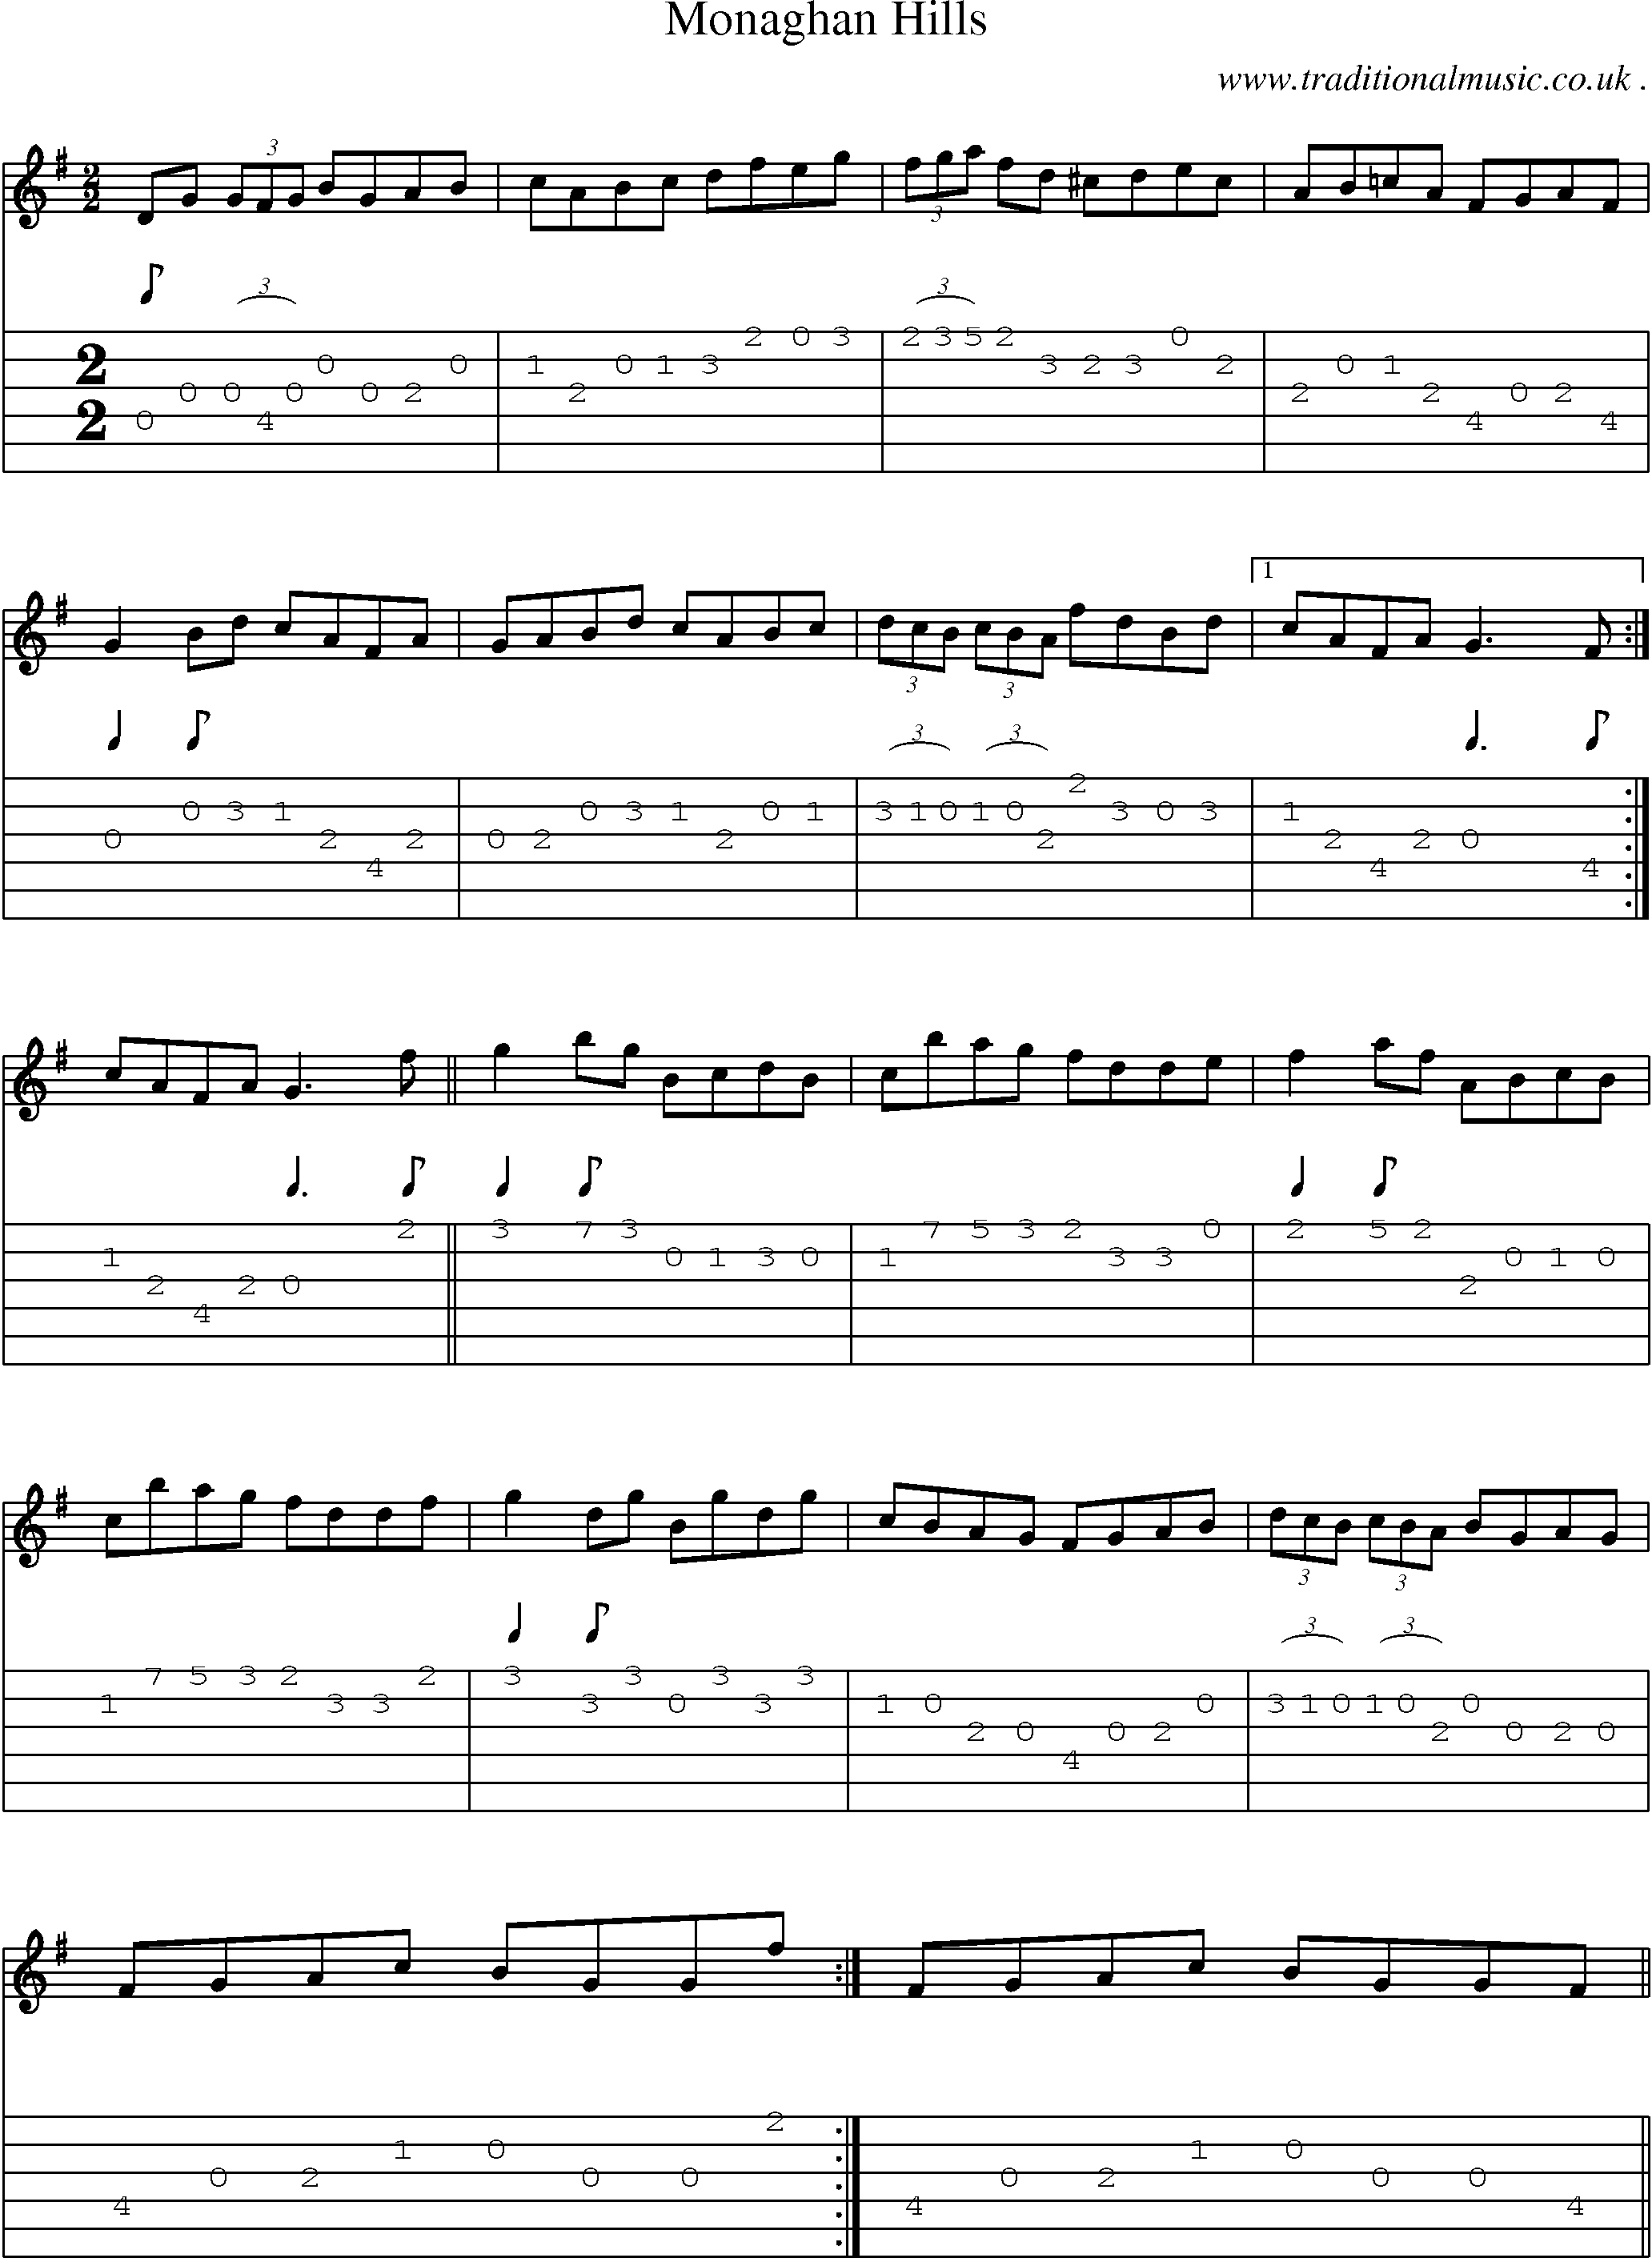 Sheet-Music and Guitar Tabs for Monaghan Hills